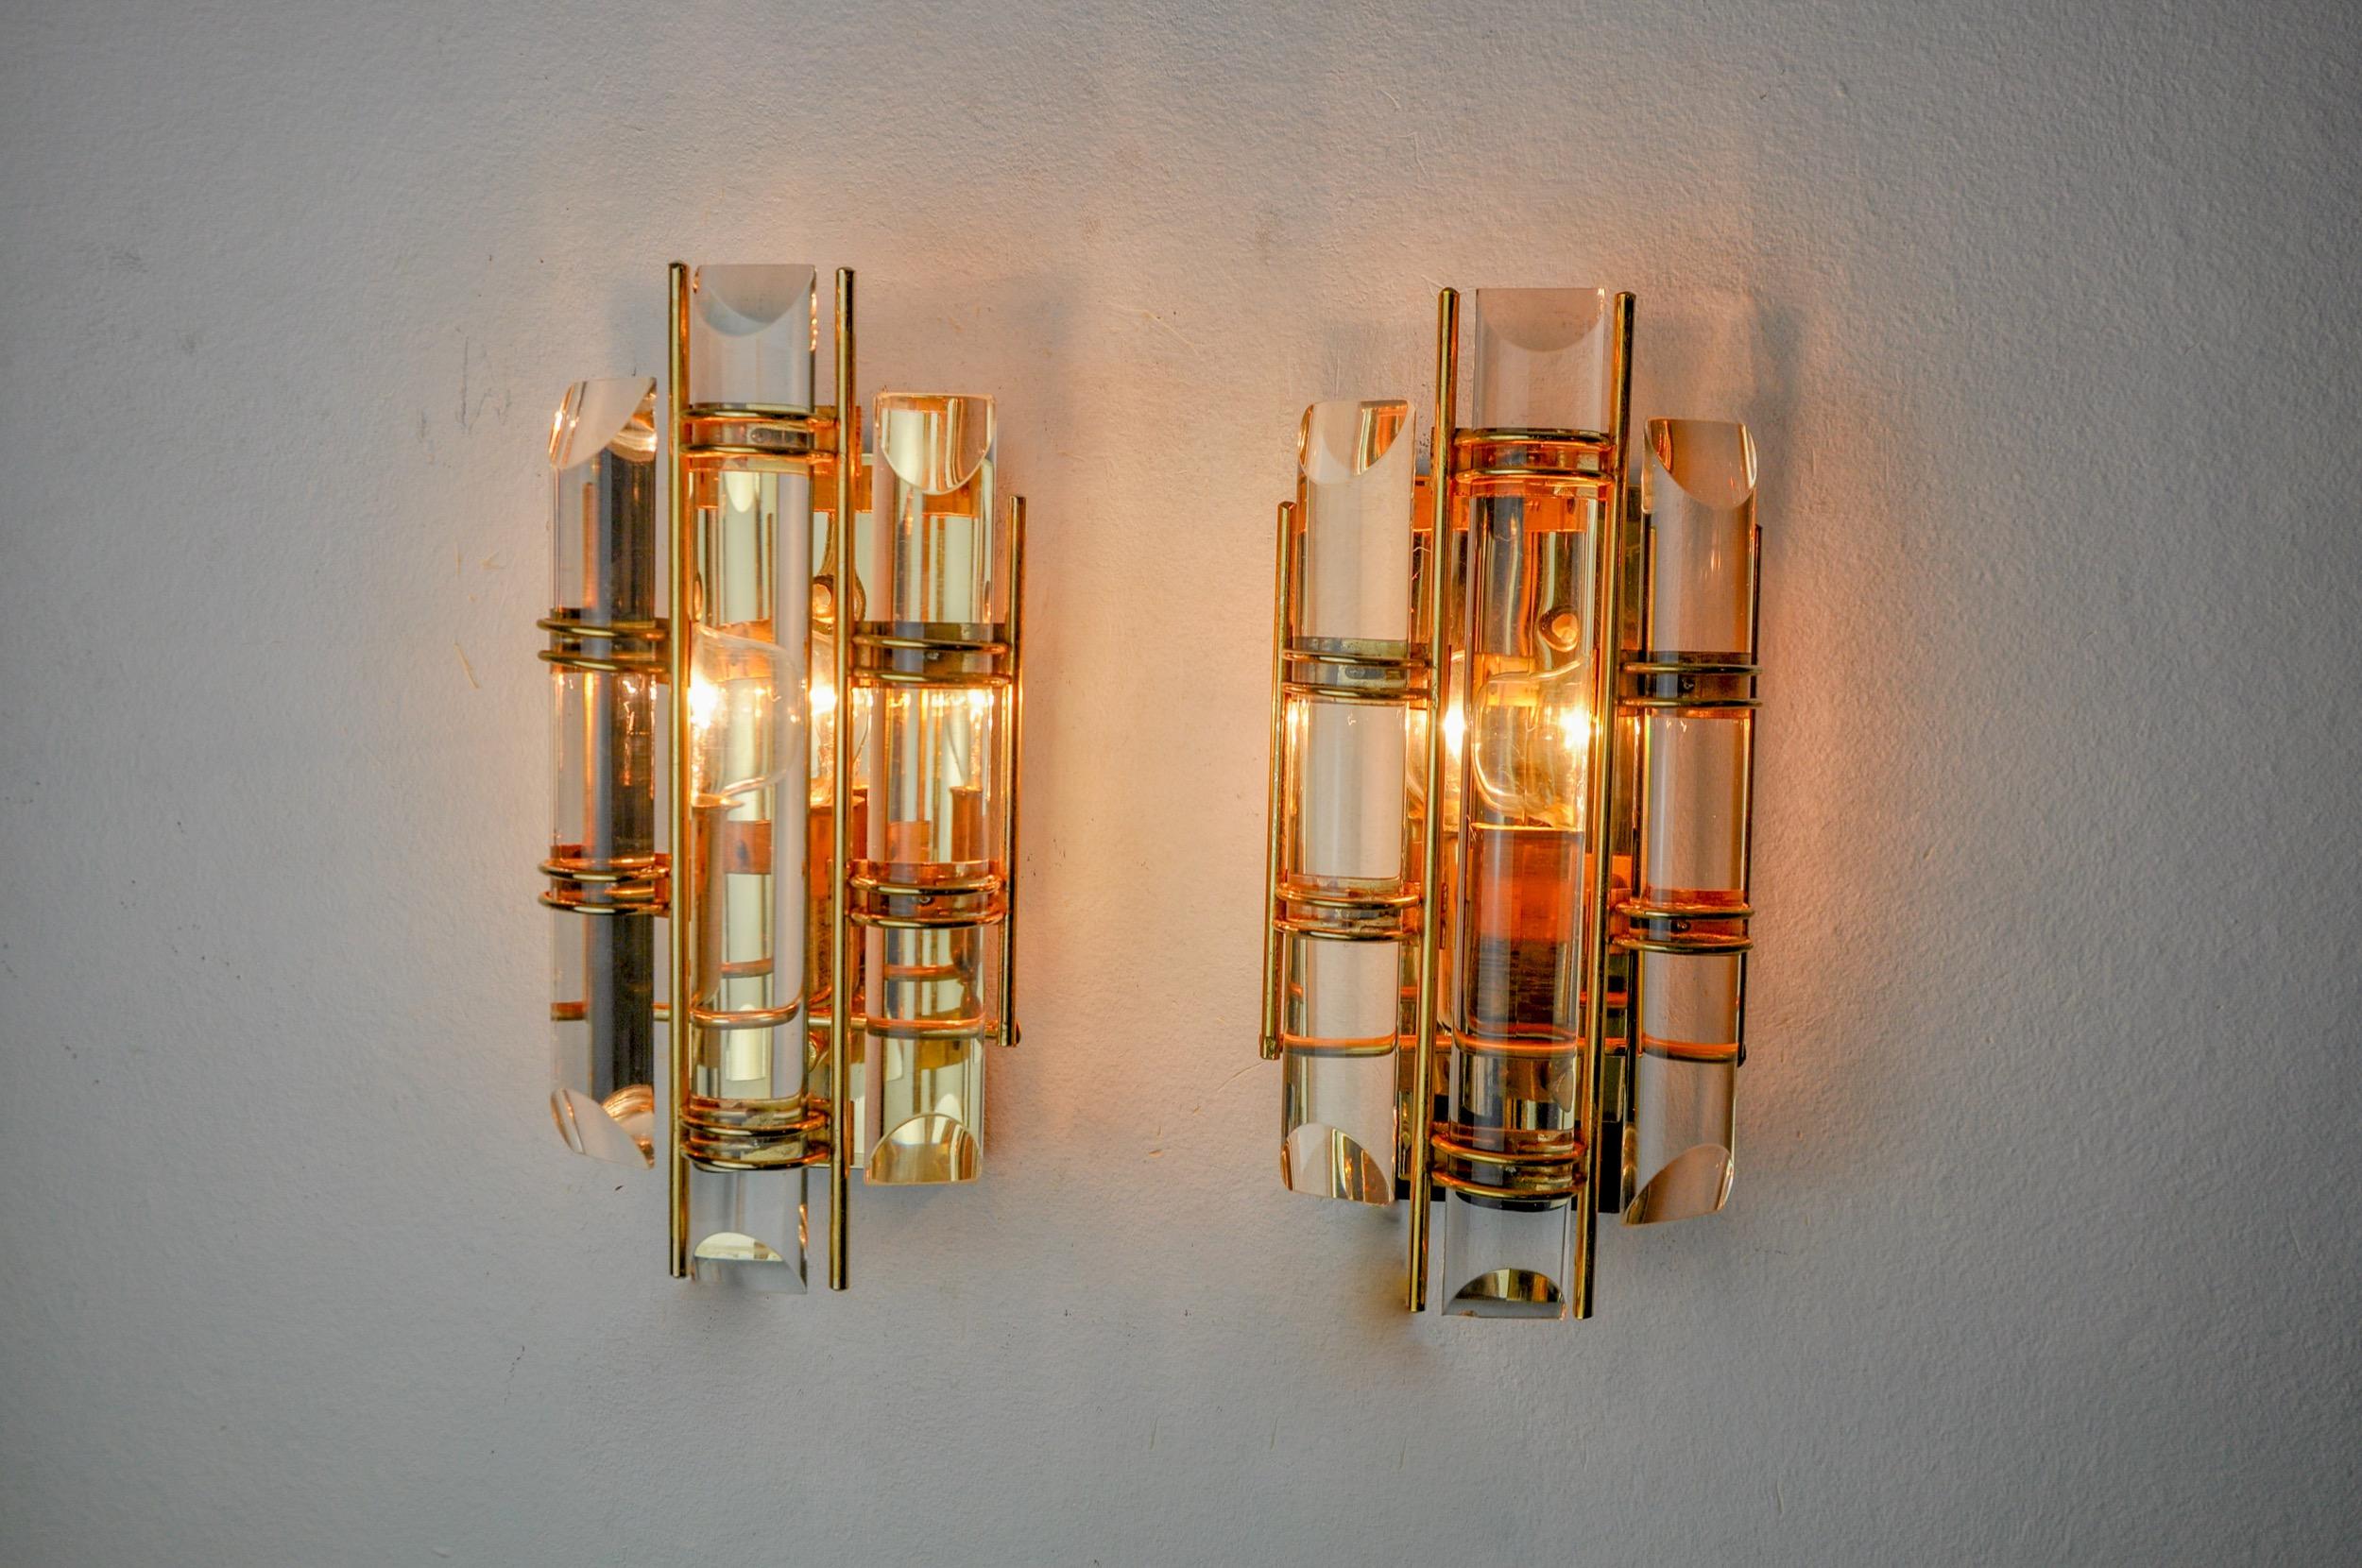 Very nice pair of venini wall lamp produced in italy in the 70s. Cut glass and gilded metal structure. Unique object that will illuminate wonderfully and bring a real design touch to your interior. Verified electricity, time mark consistent with the